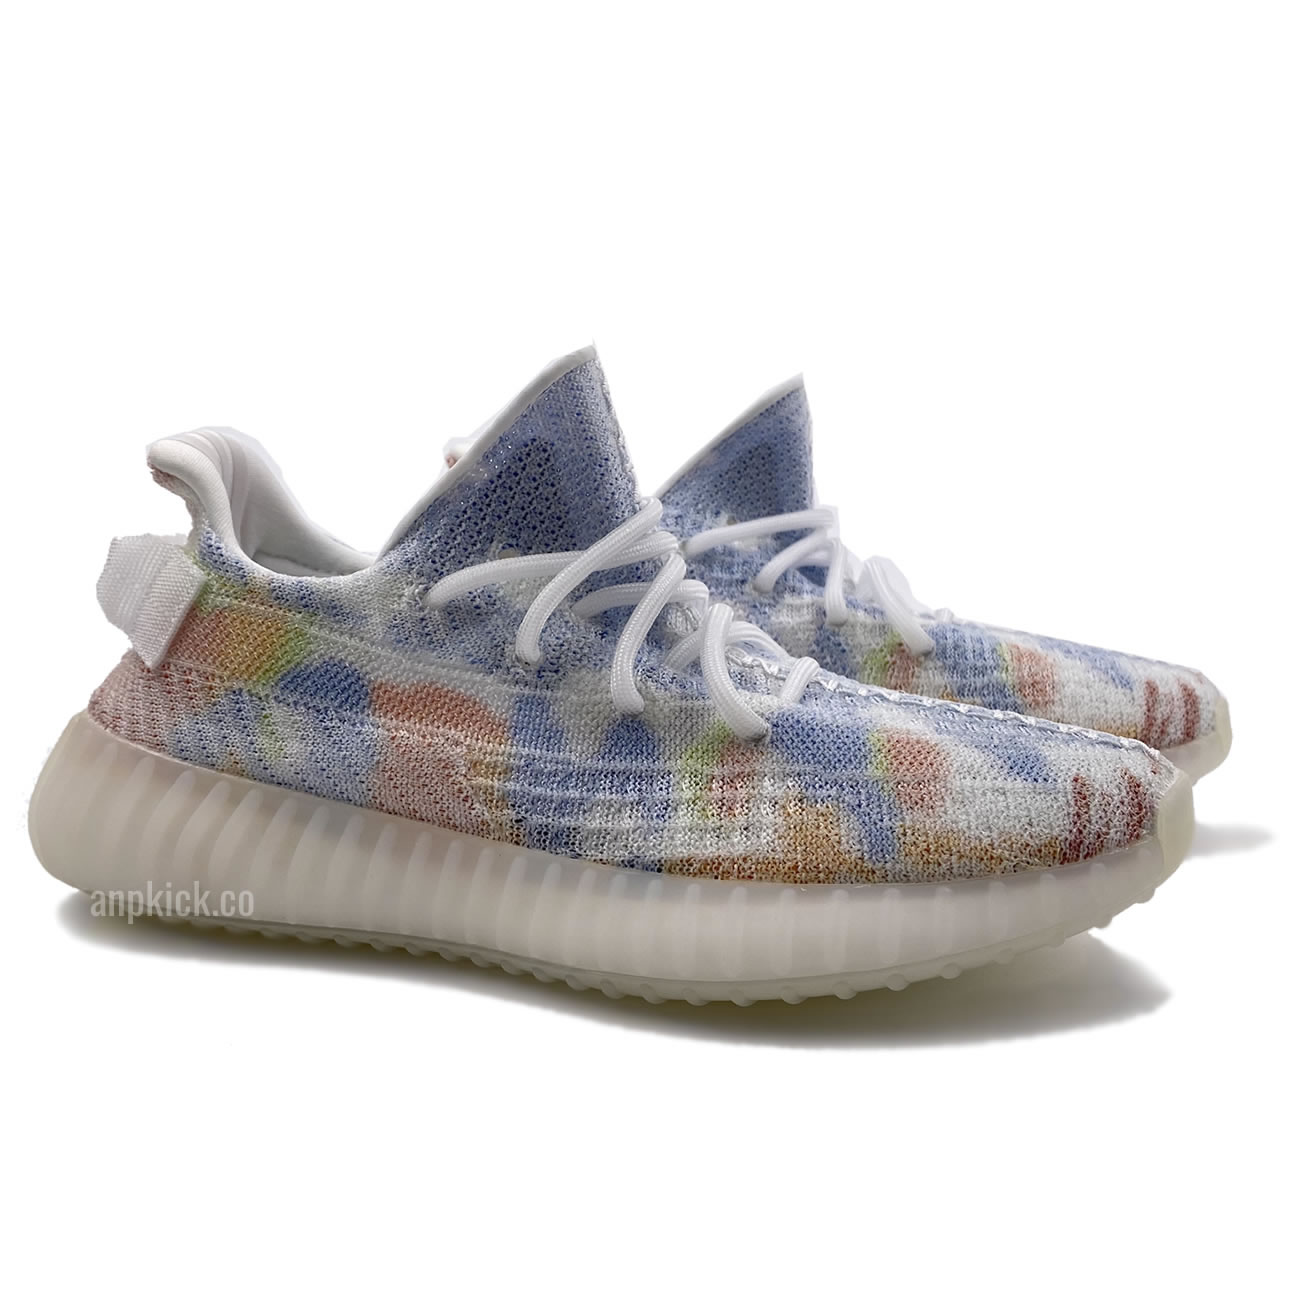 New Custom Yeezy Boost 350 V2 "Colorful" For Sale